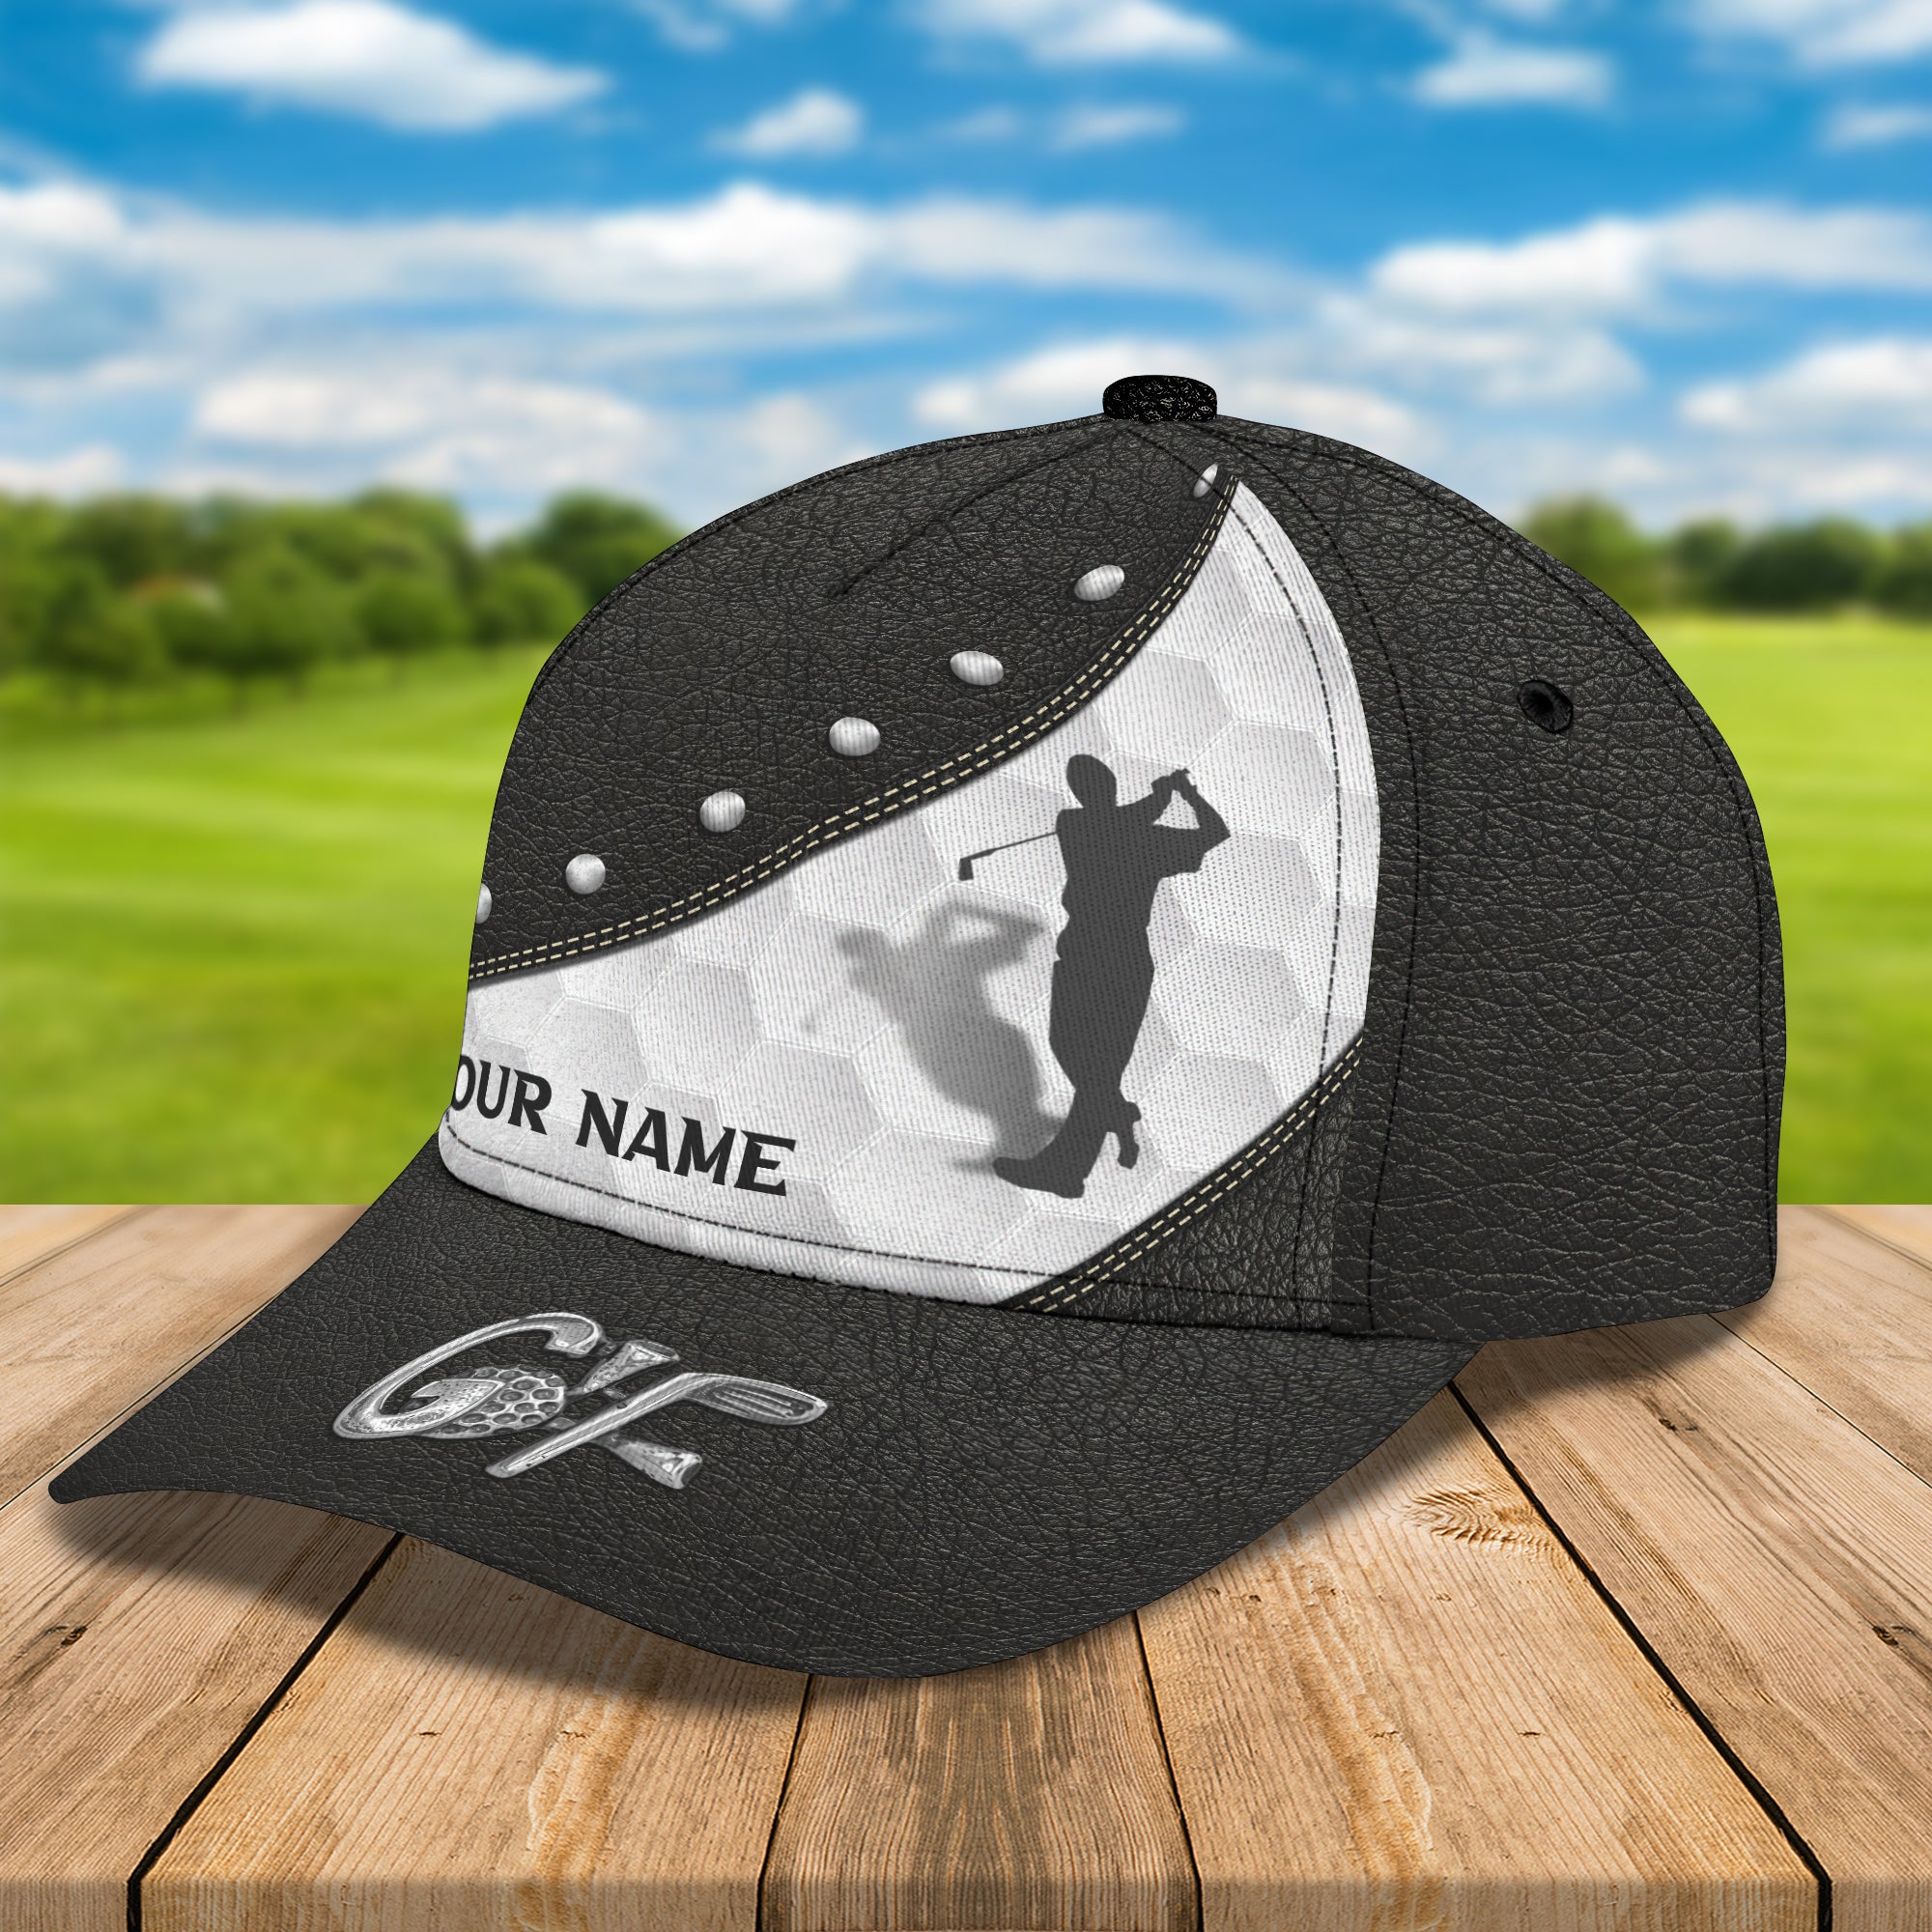 Golf - Personalized Name Cap 3 - Tad - Hkm